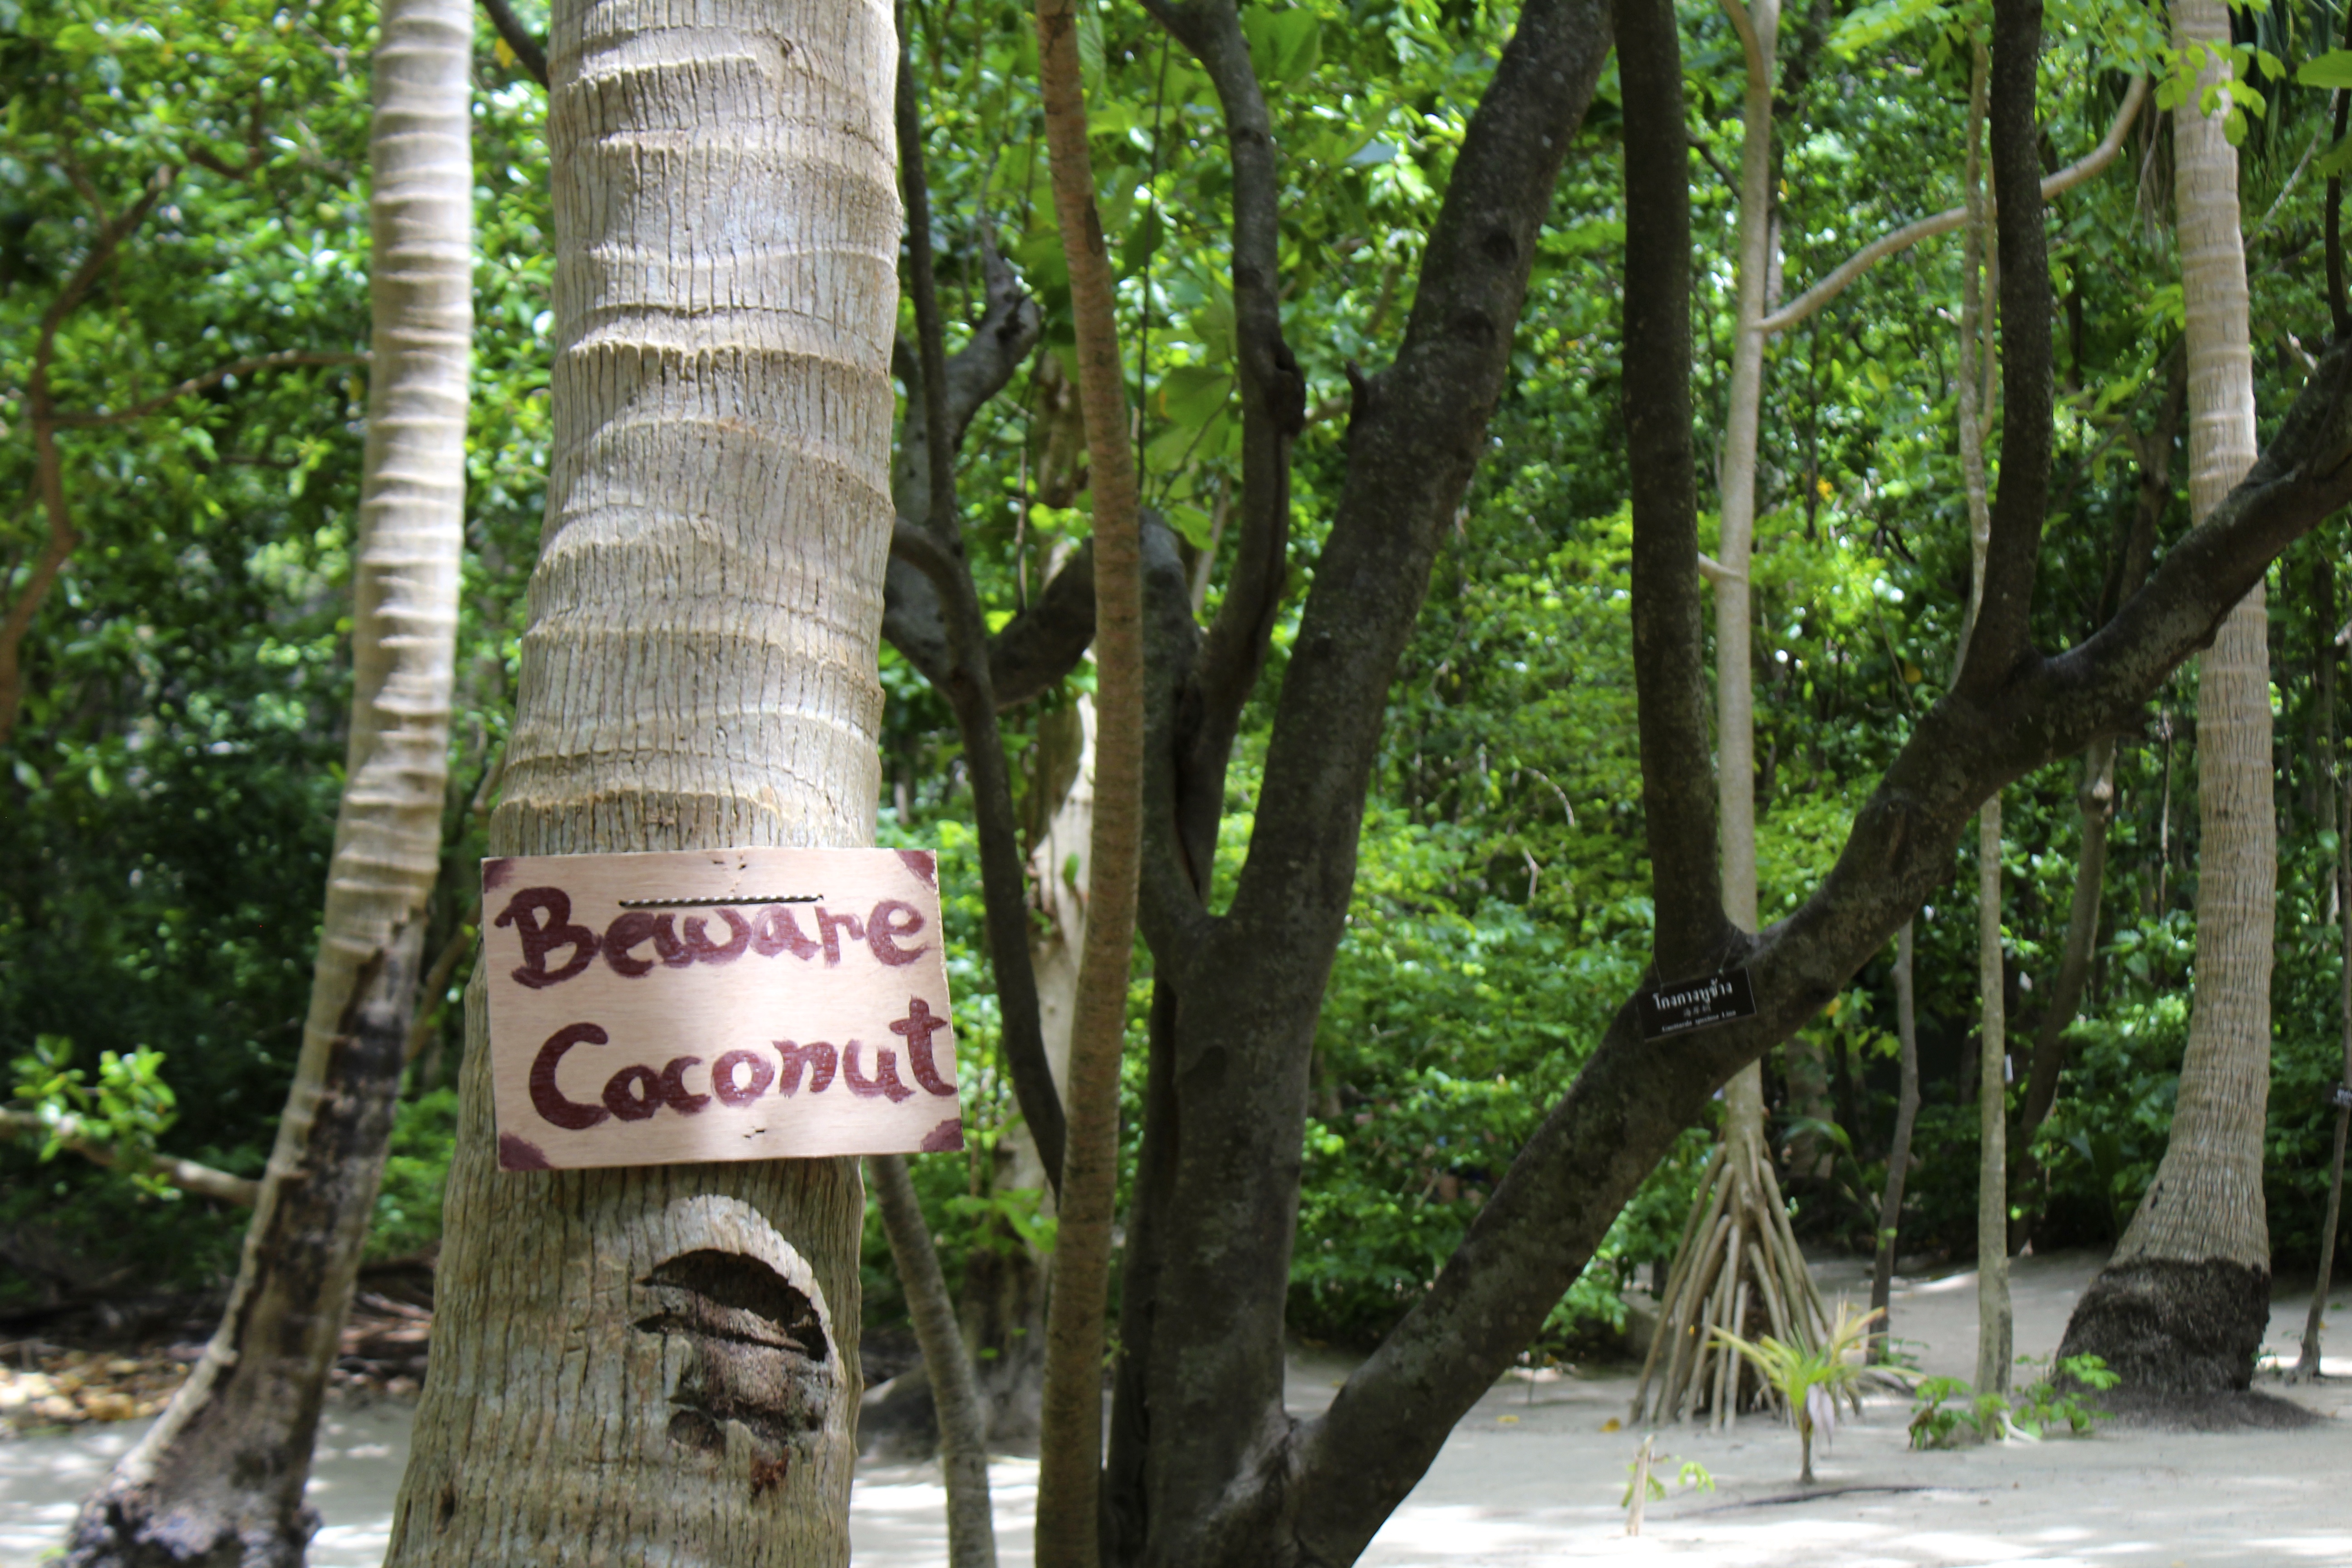 Loved this sign nailed to a coconut tree!